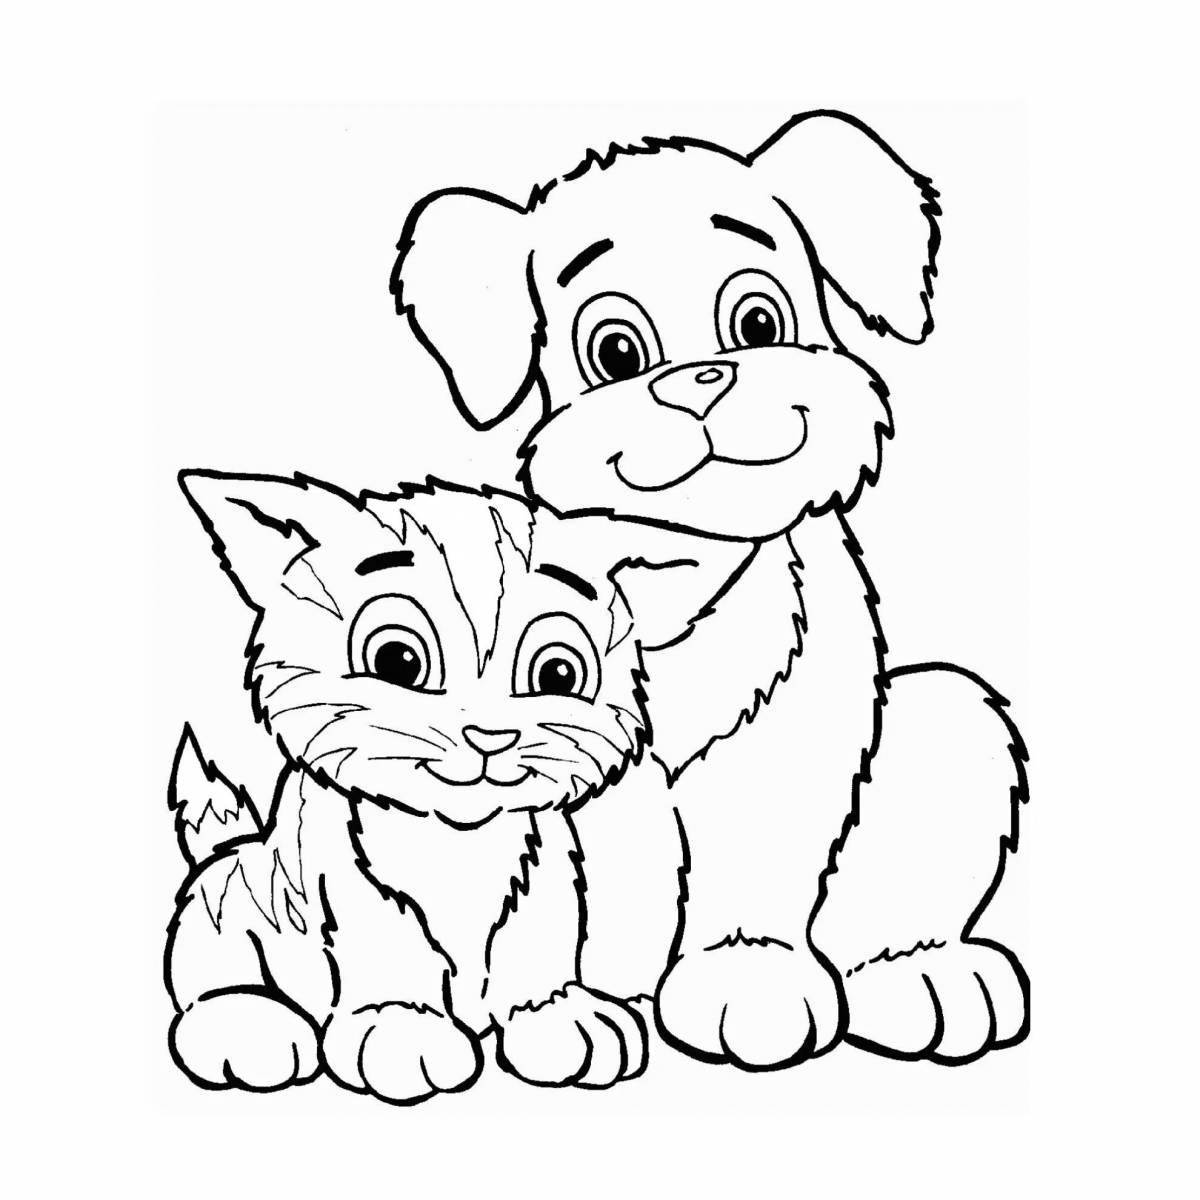 Sweet coloring for girls, cats and dogs